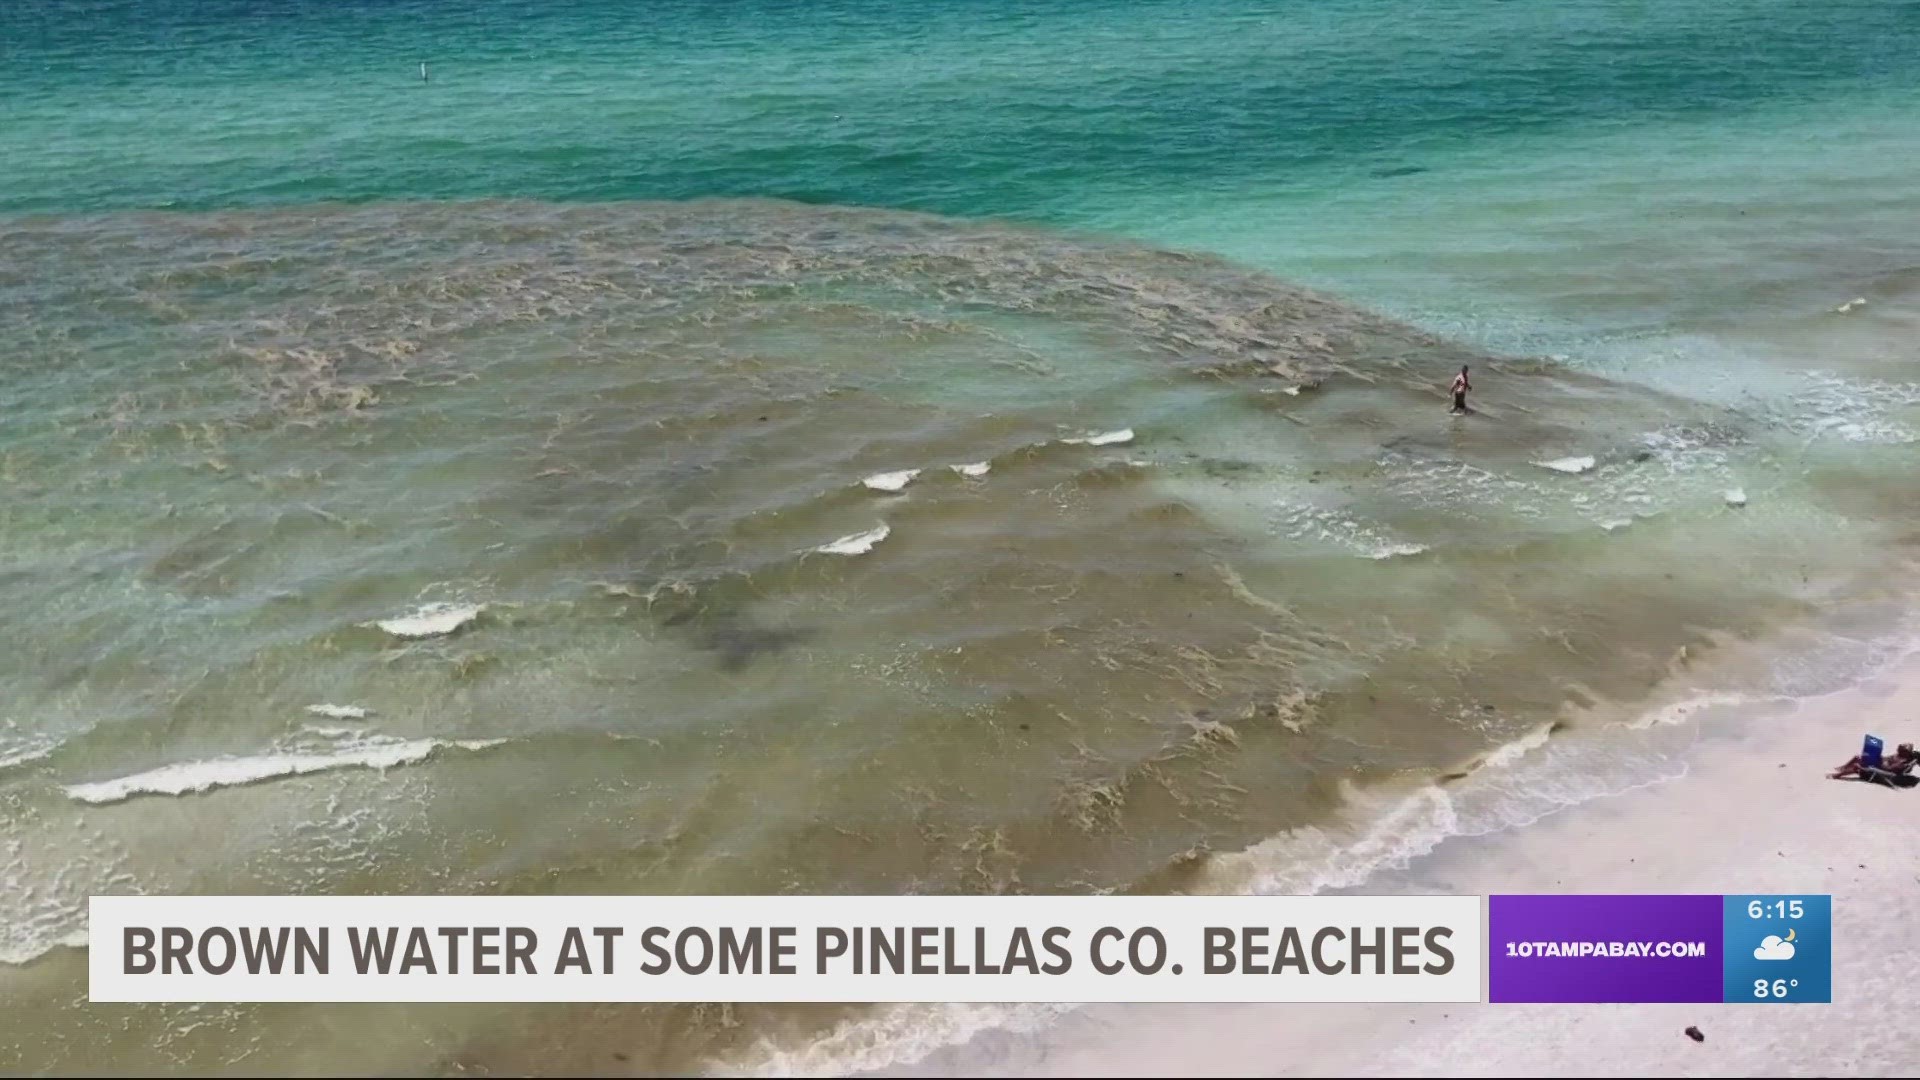 Pinellas County officials say they received dozens of reports regarding discolored water off the beaches.